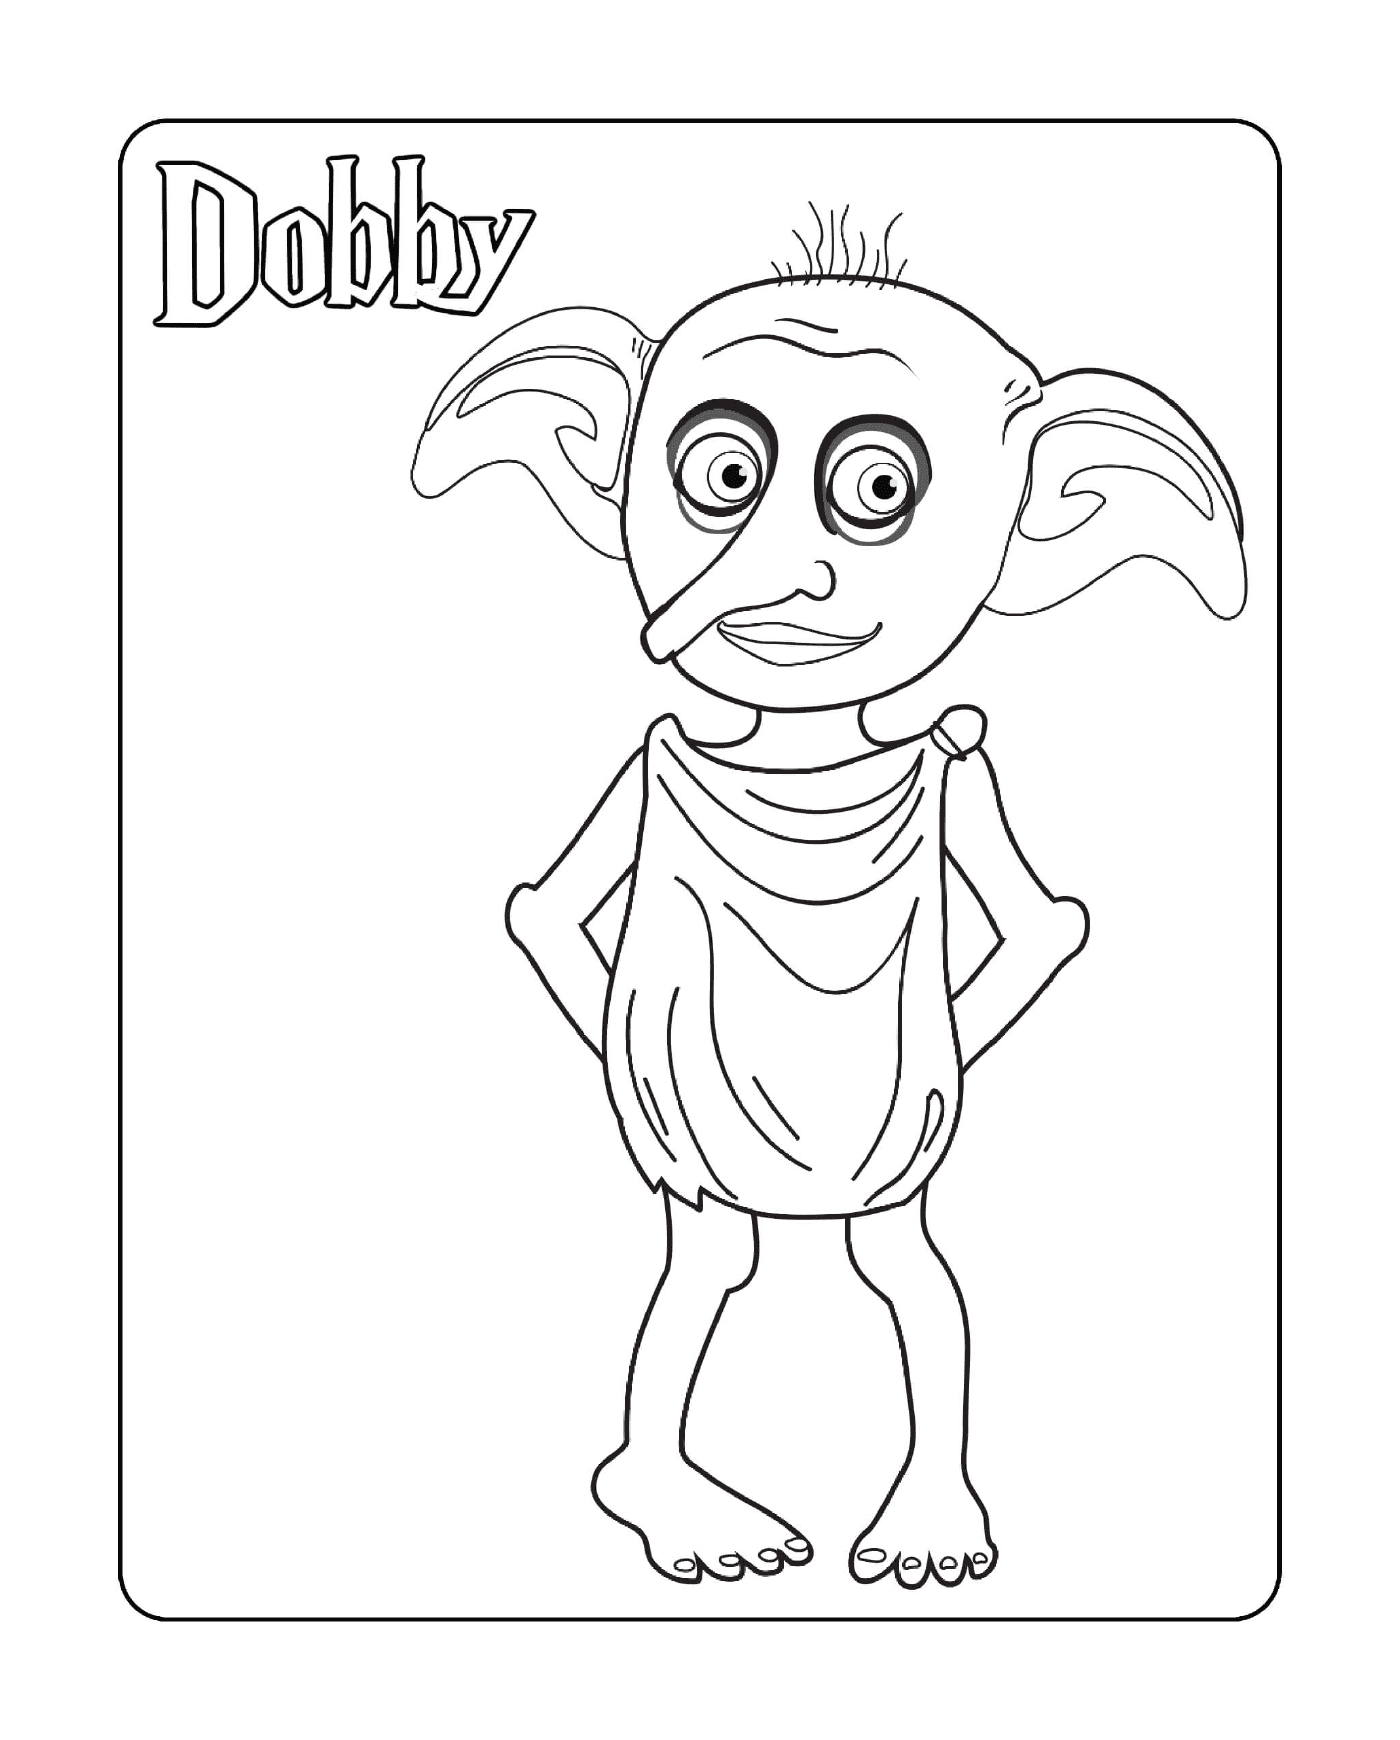 coloriage Dobby